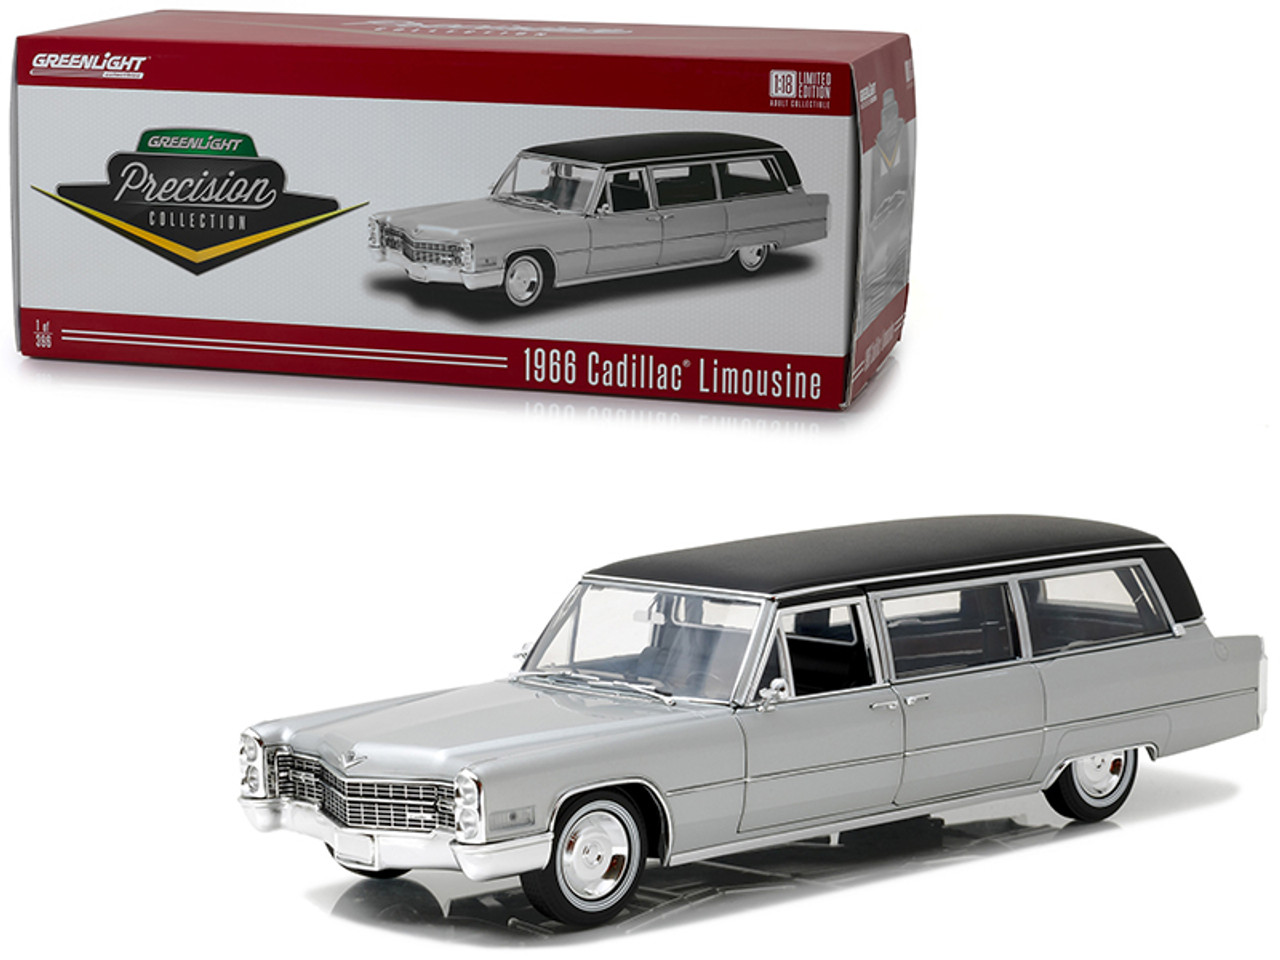 1966 Cadillac S&S Limousine Silver with Black Top "Precision Collection" Limited Edition to 396 pieces Worldwide 1/18 Diecast Model Car by Greenlight